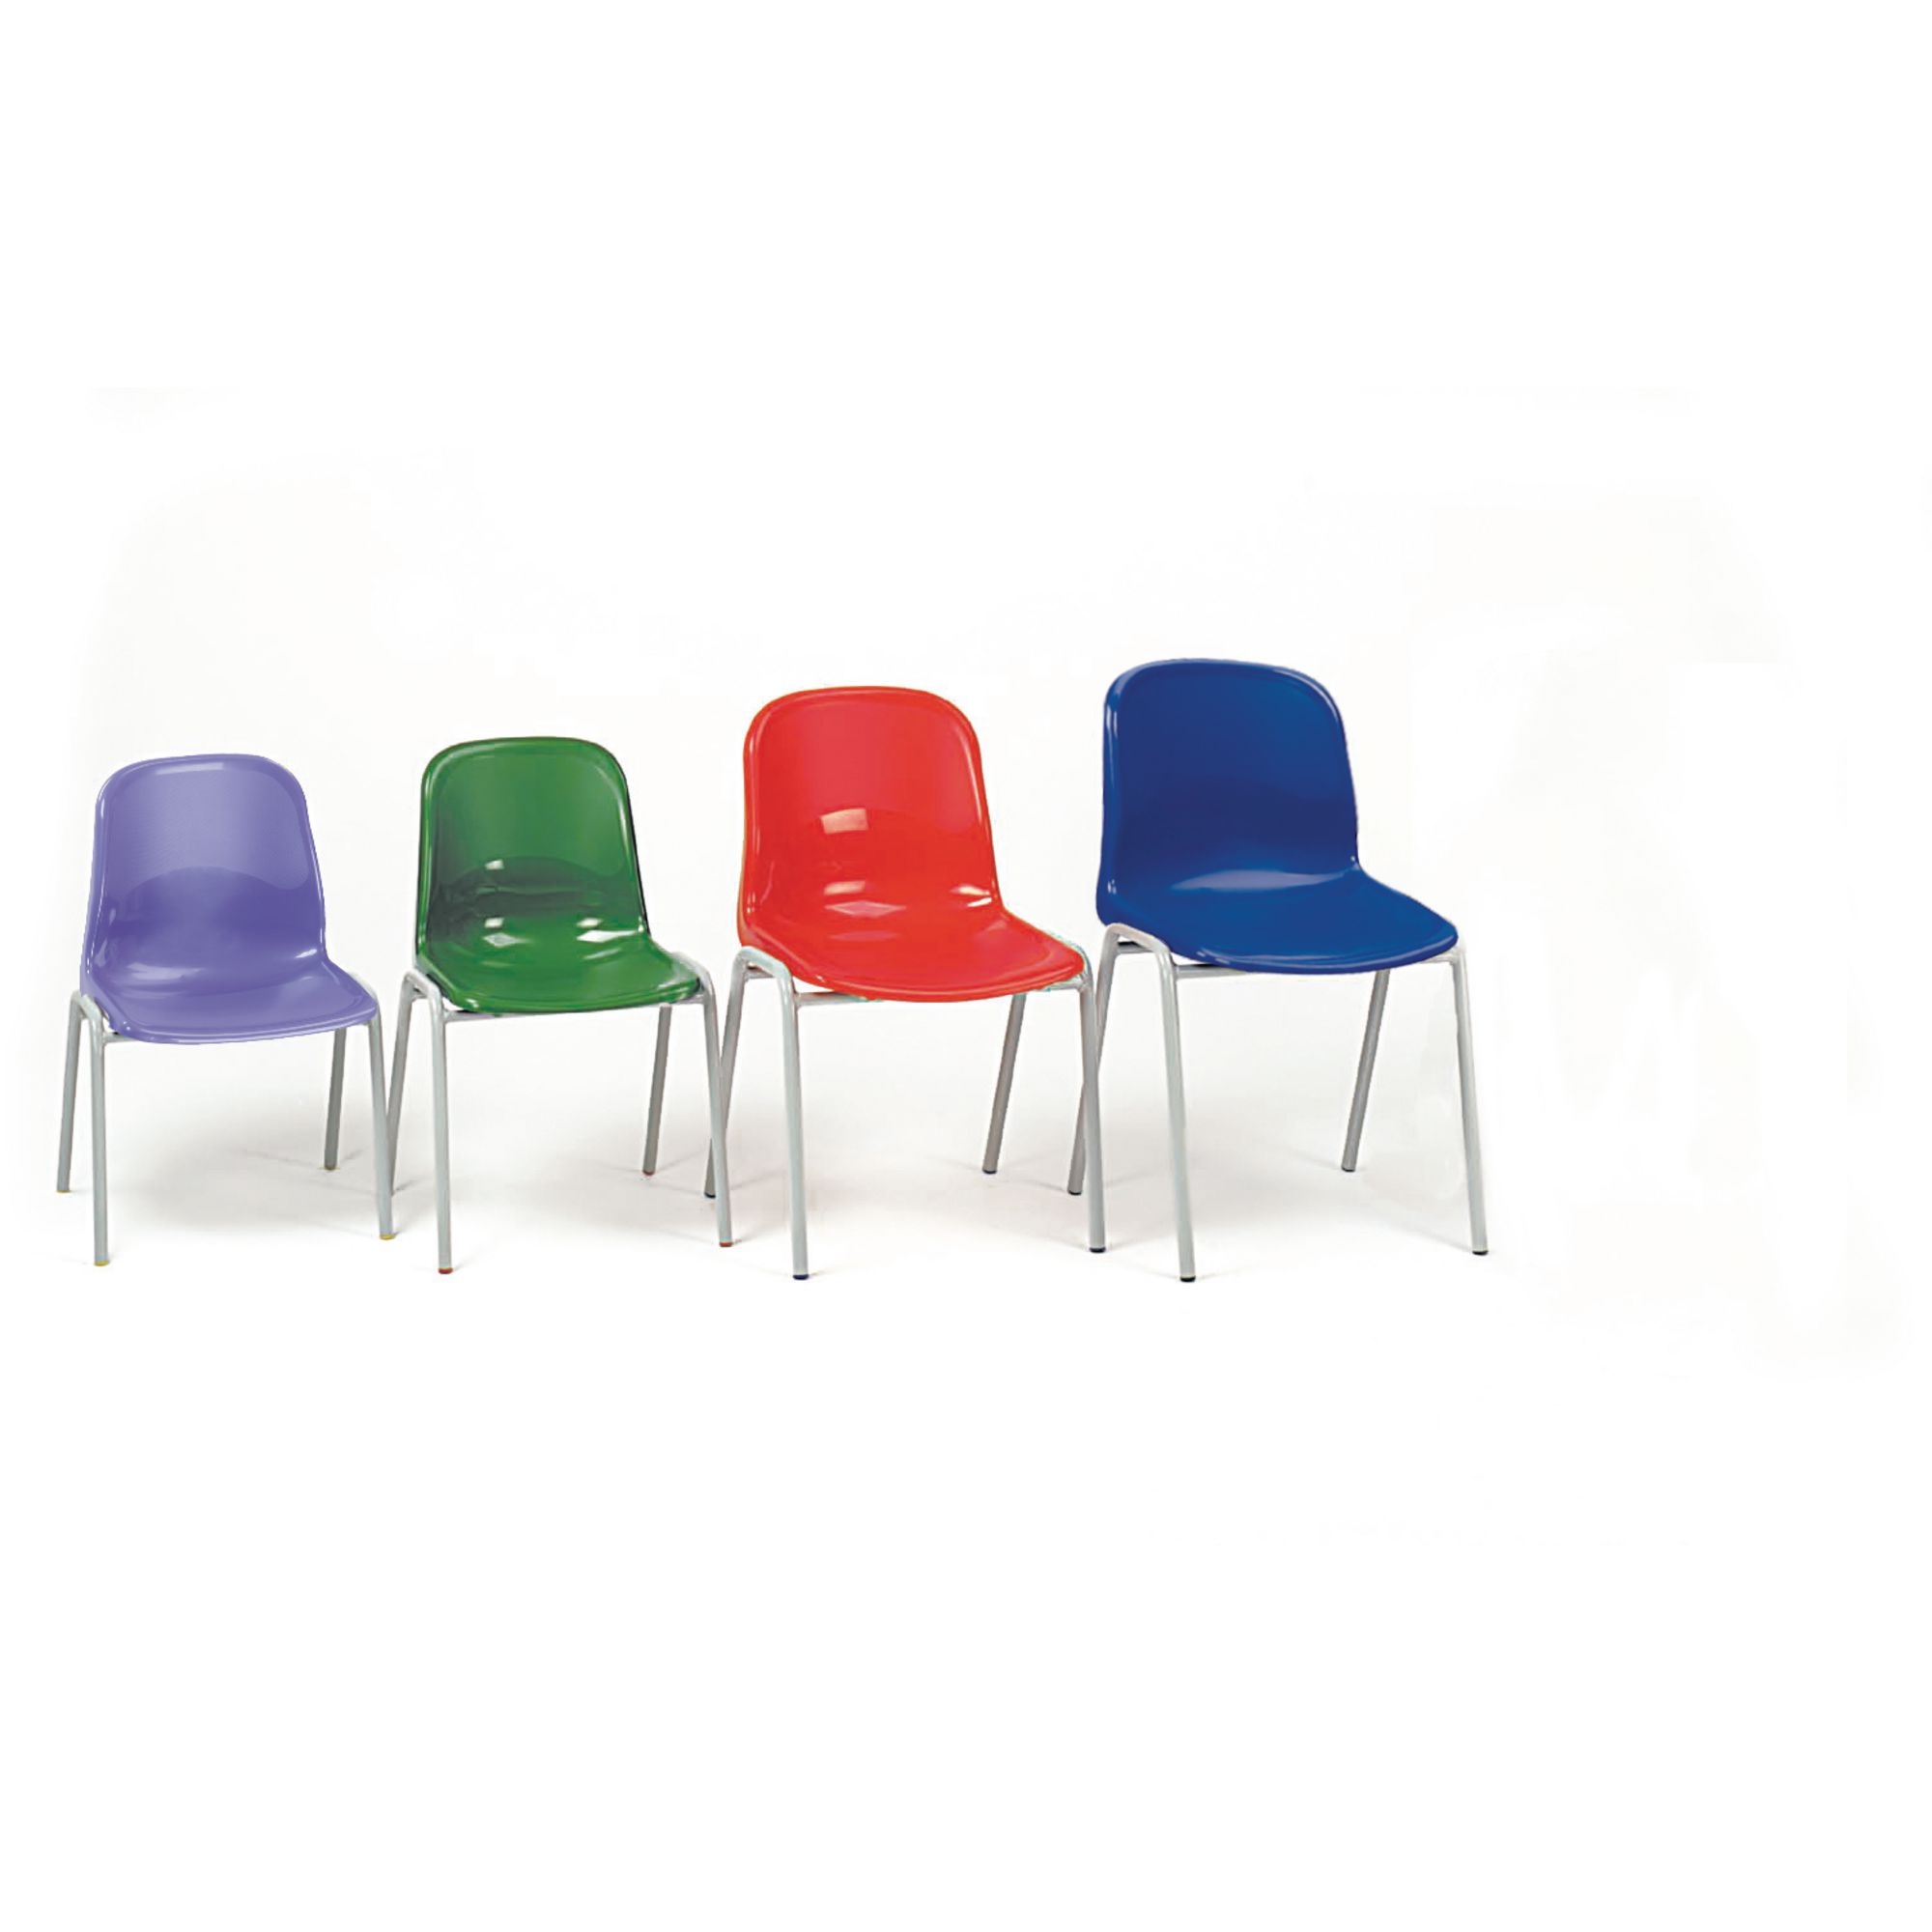 A strong robust polypropylene stacking chair designed for the classroom. Meets the newly published standard BS EN1729 parts 1 and 2 (Chairs and tables for educational institutions). Harmony chairs stack safely and neatly. Open textured, slip resistant seat and back panel cleans easily. Seat colours: brown, blue, red, green, mulberry, grey and violet. PLEASE STATE COLOUR REQUIRED WHEN ORDERING. Available in 6 seat heights. Non ignition resistant.